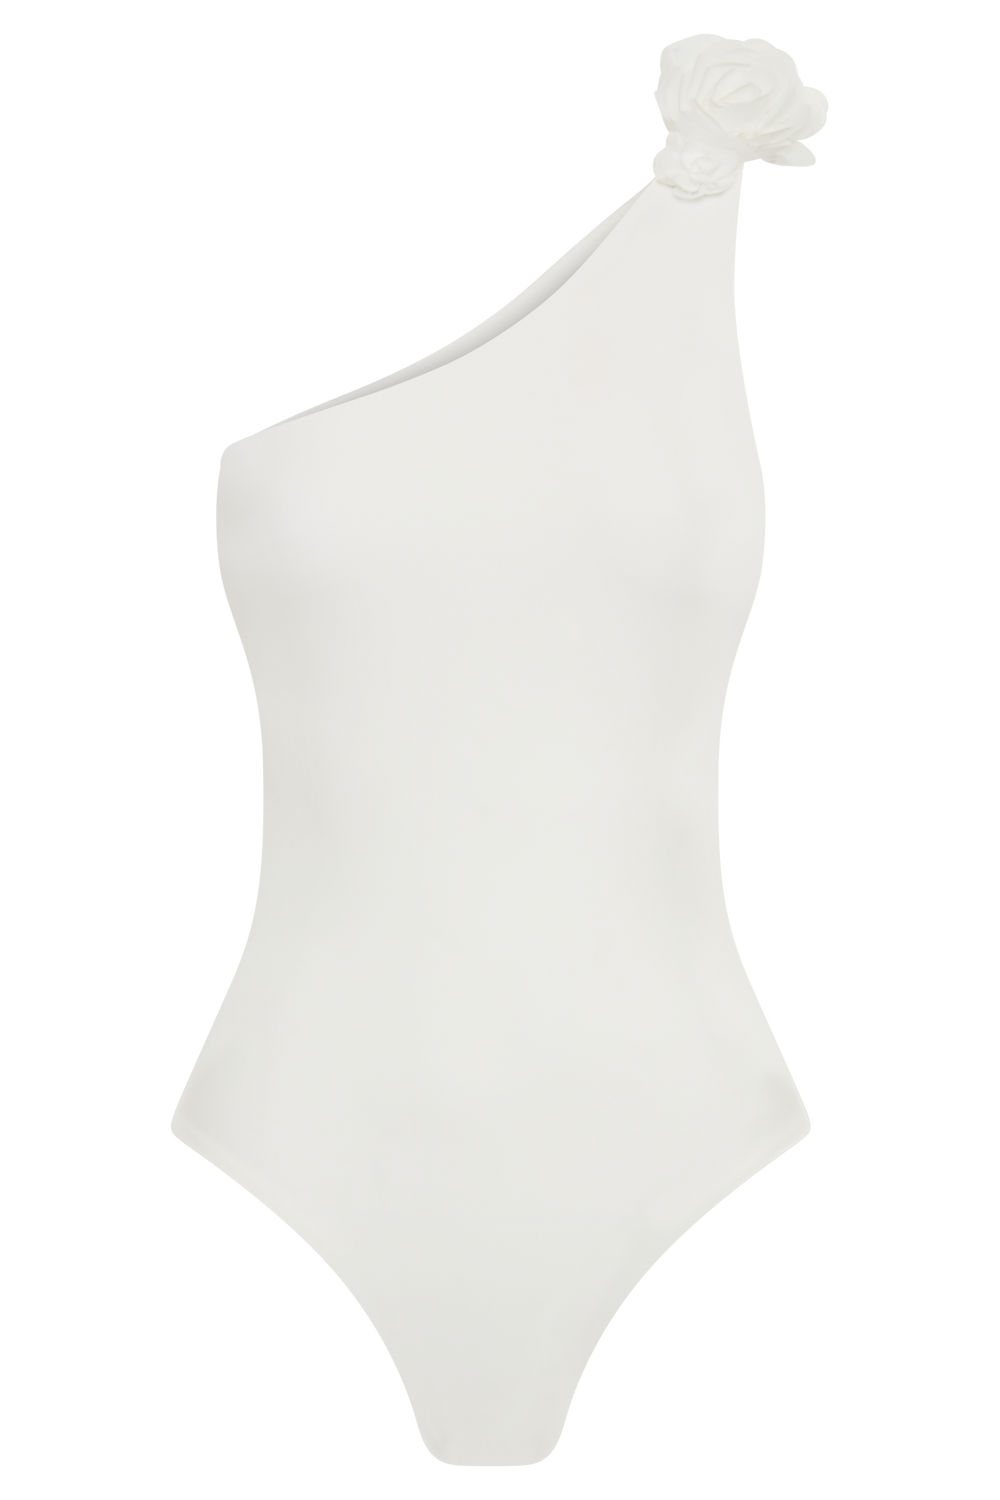 Taryn Rose One Piece With Cutout - White